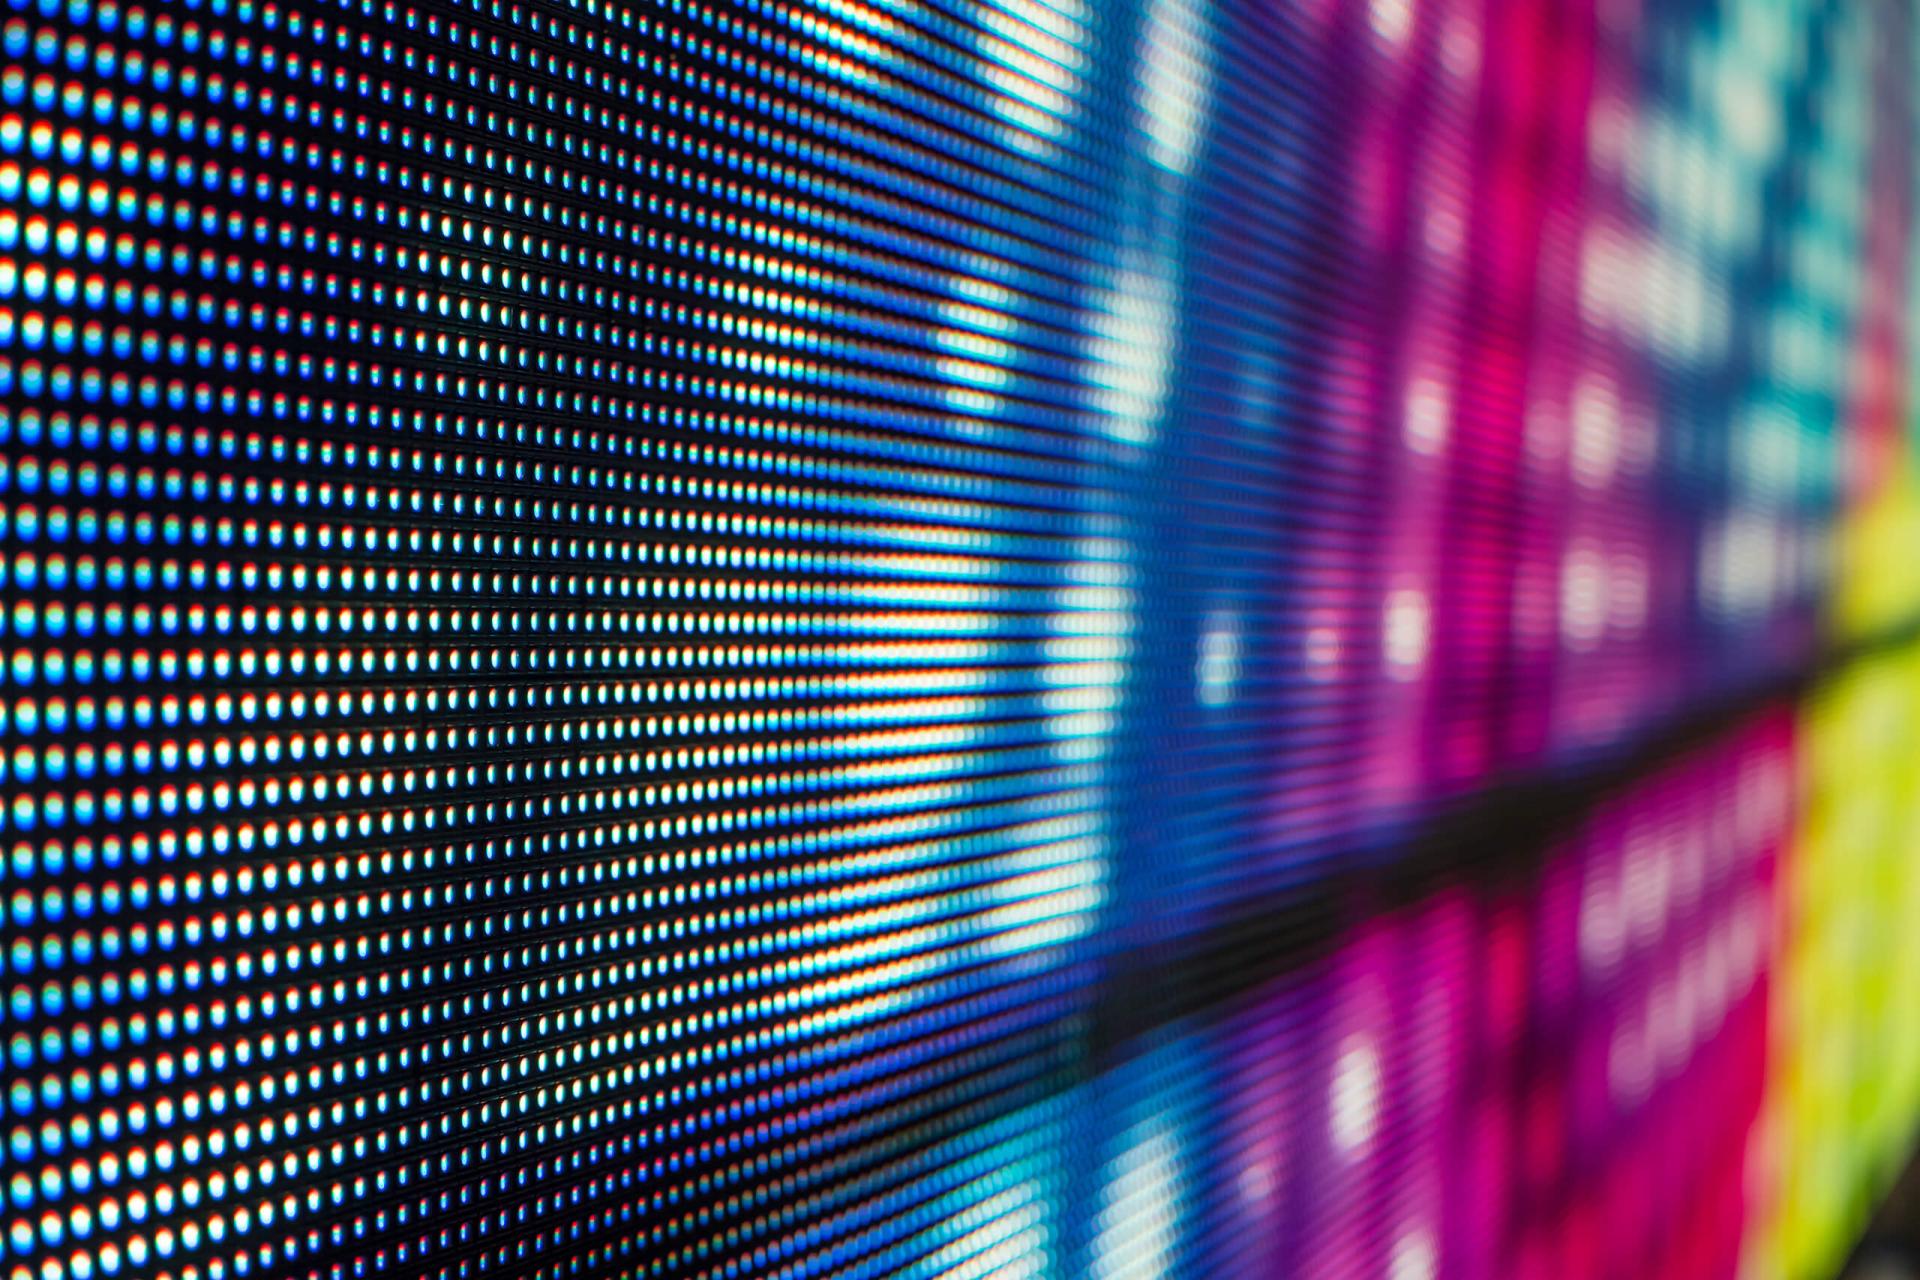 Micro LED: Next-level in Display Technology